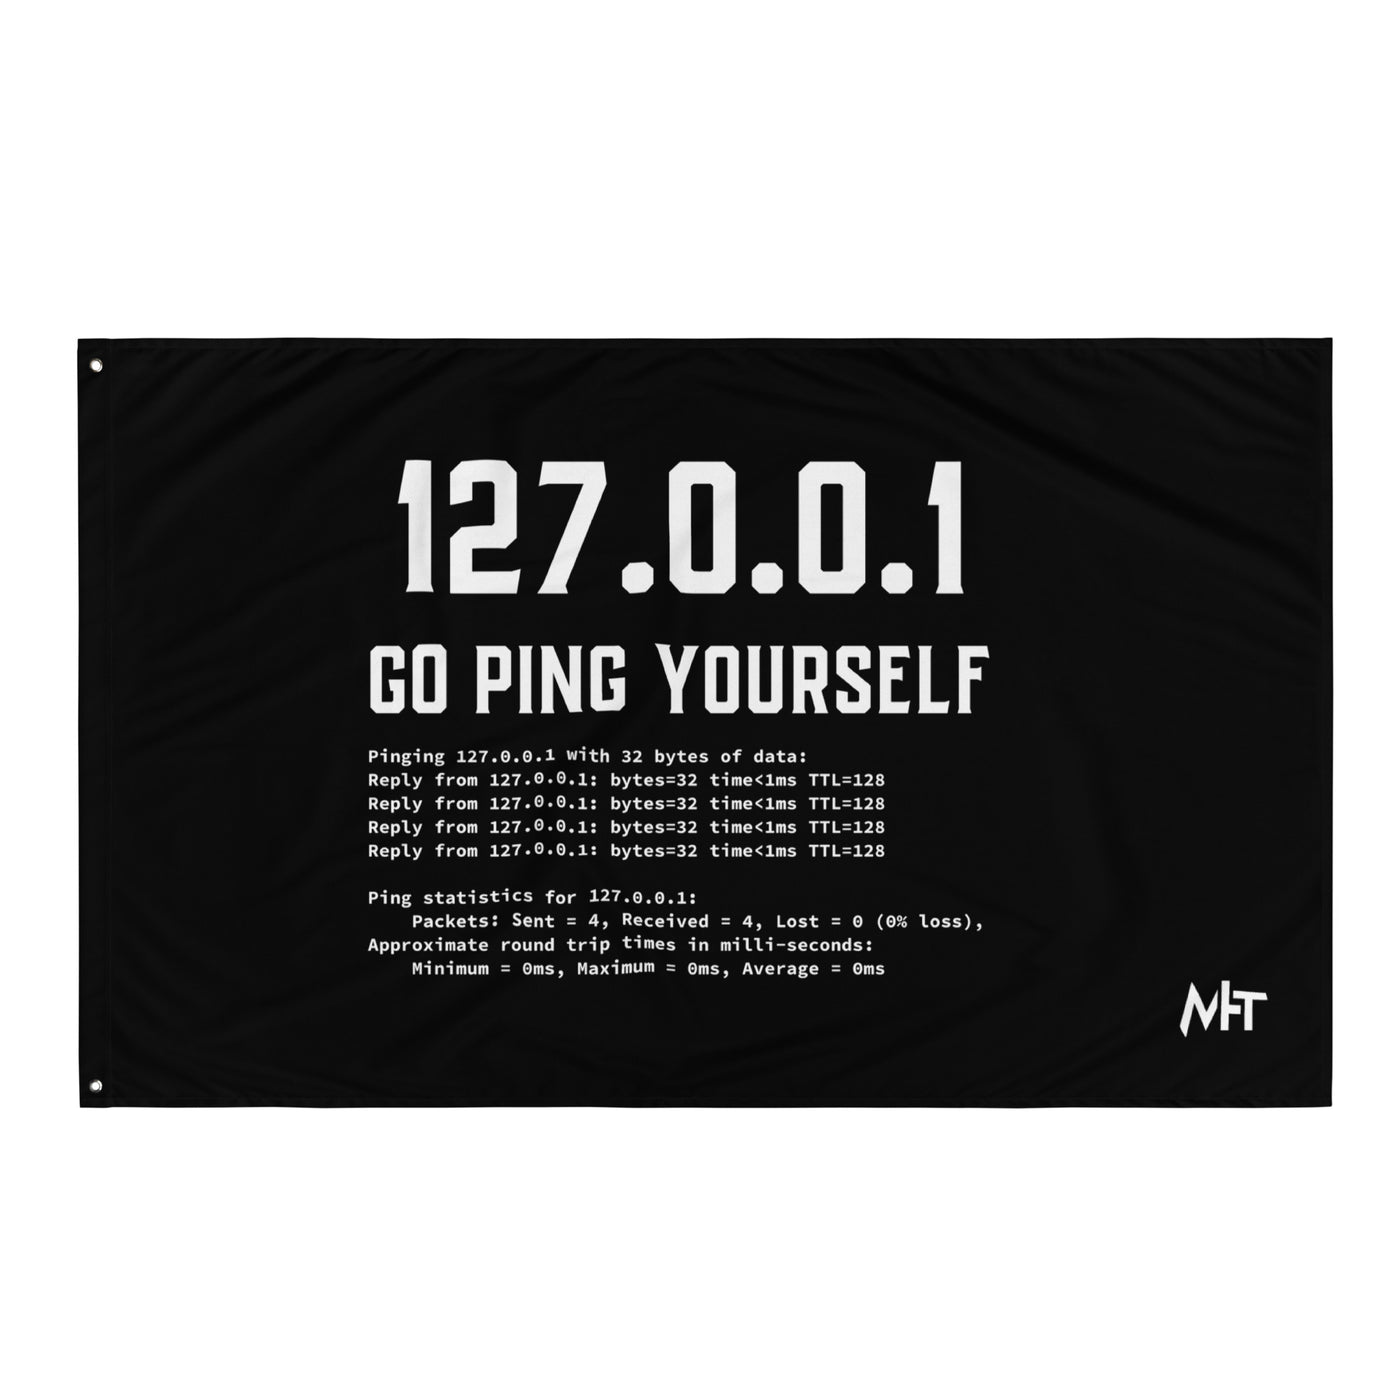 Go ping yourself - Flag